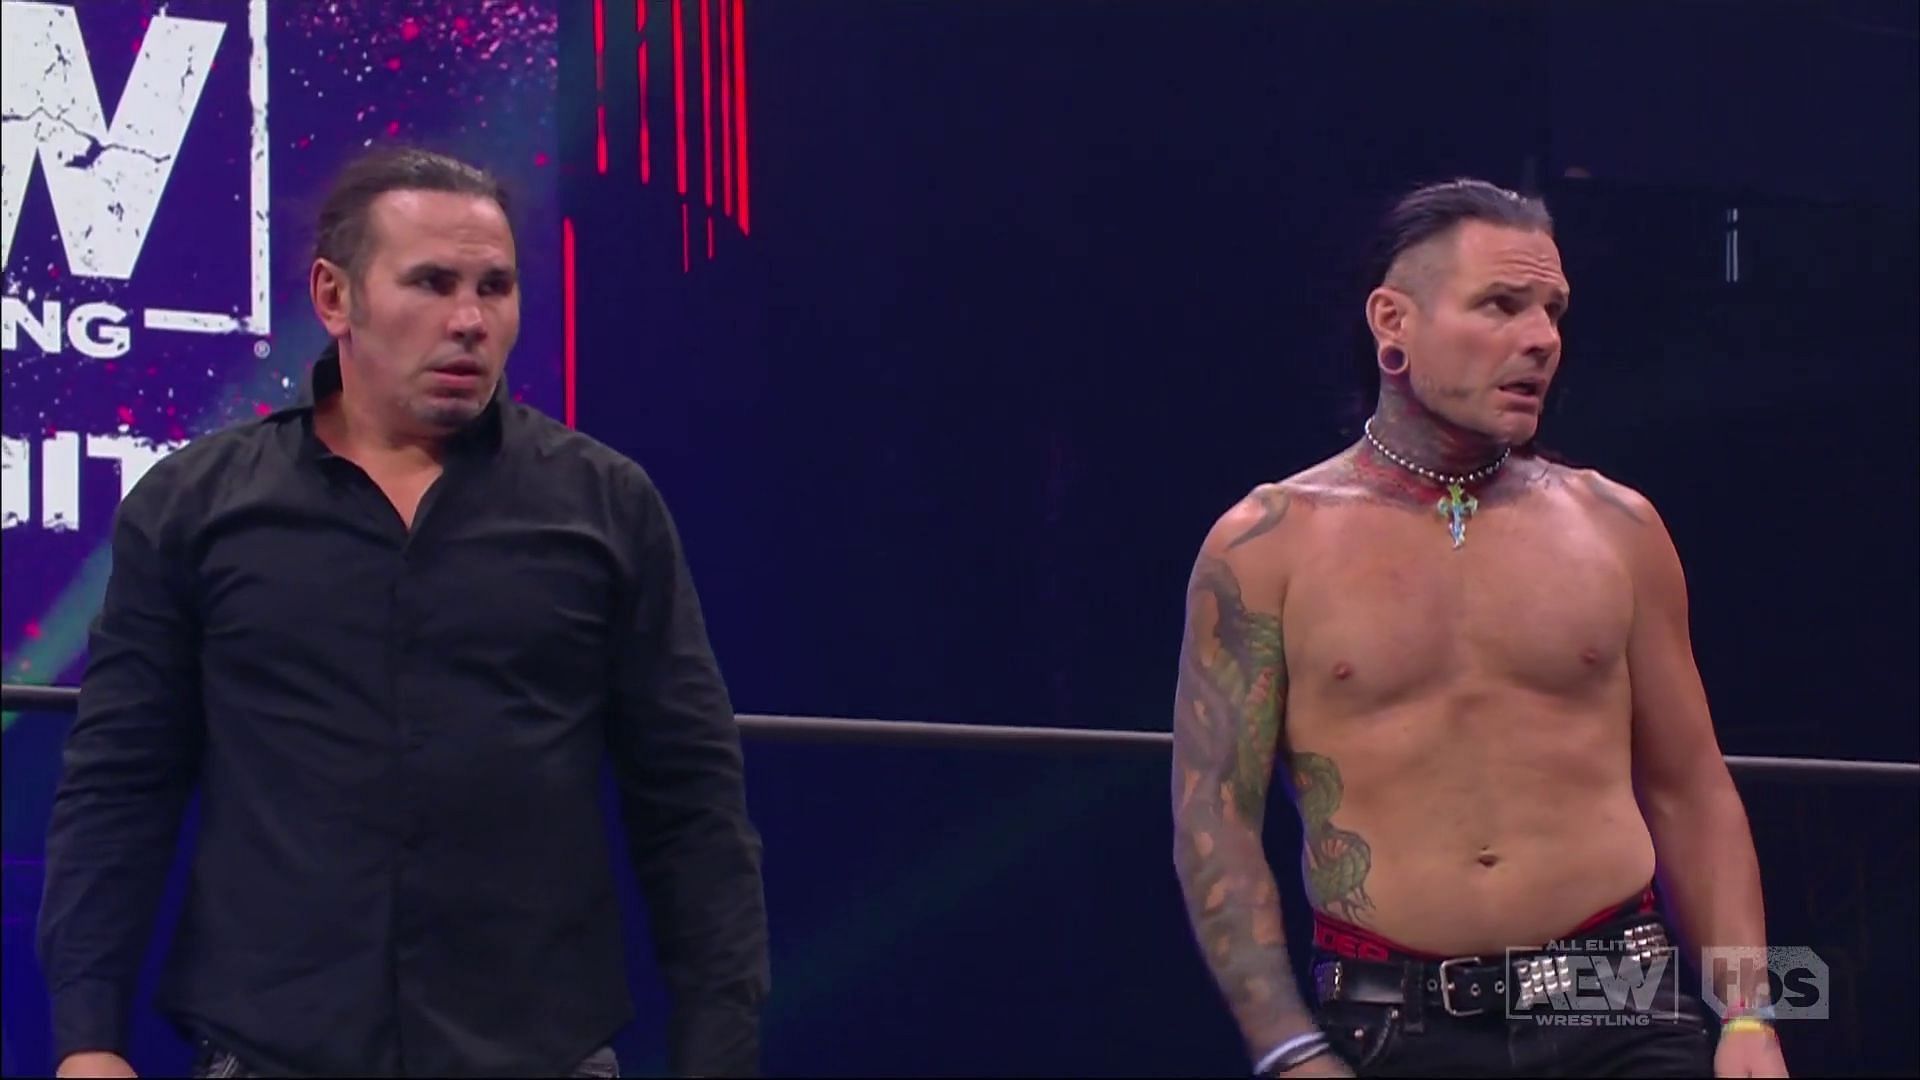 The Hardy Boyz have reunited in All Elite Wrestling.